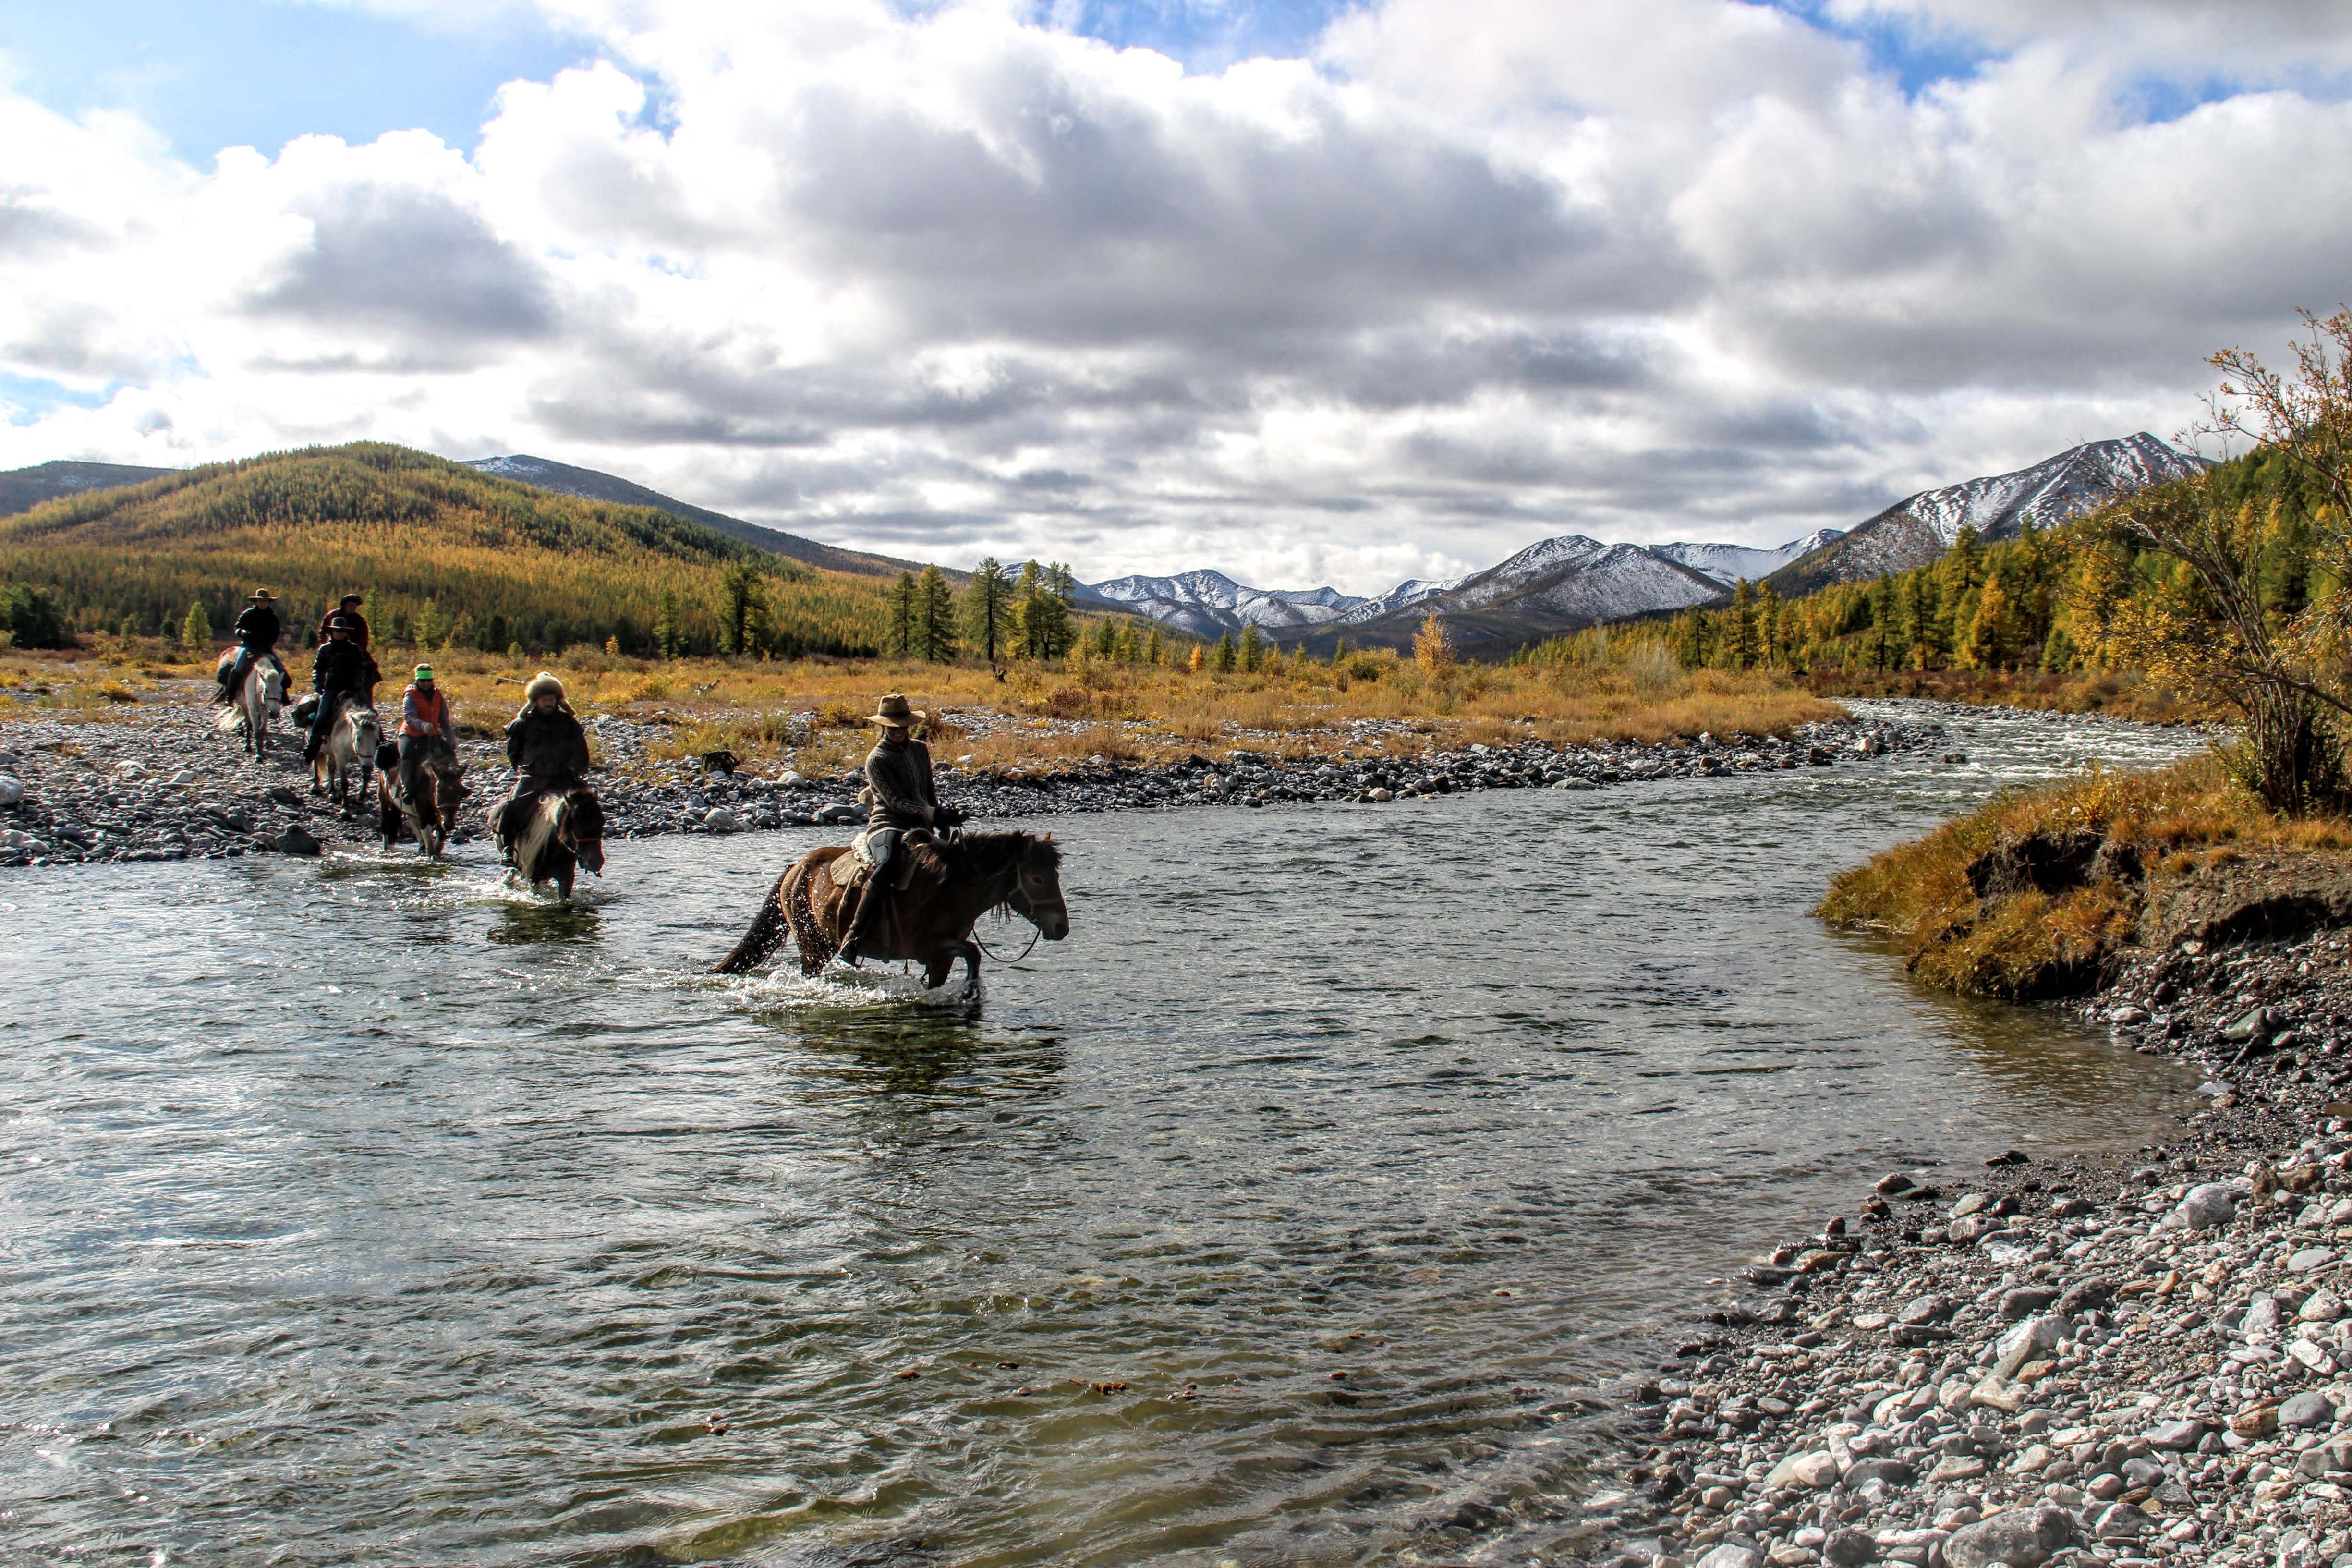 Crossing the river while horse trekking through northern Mongolia with Estancia Ranquilco